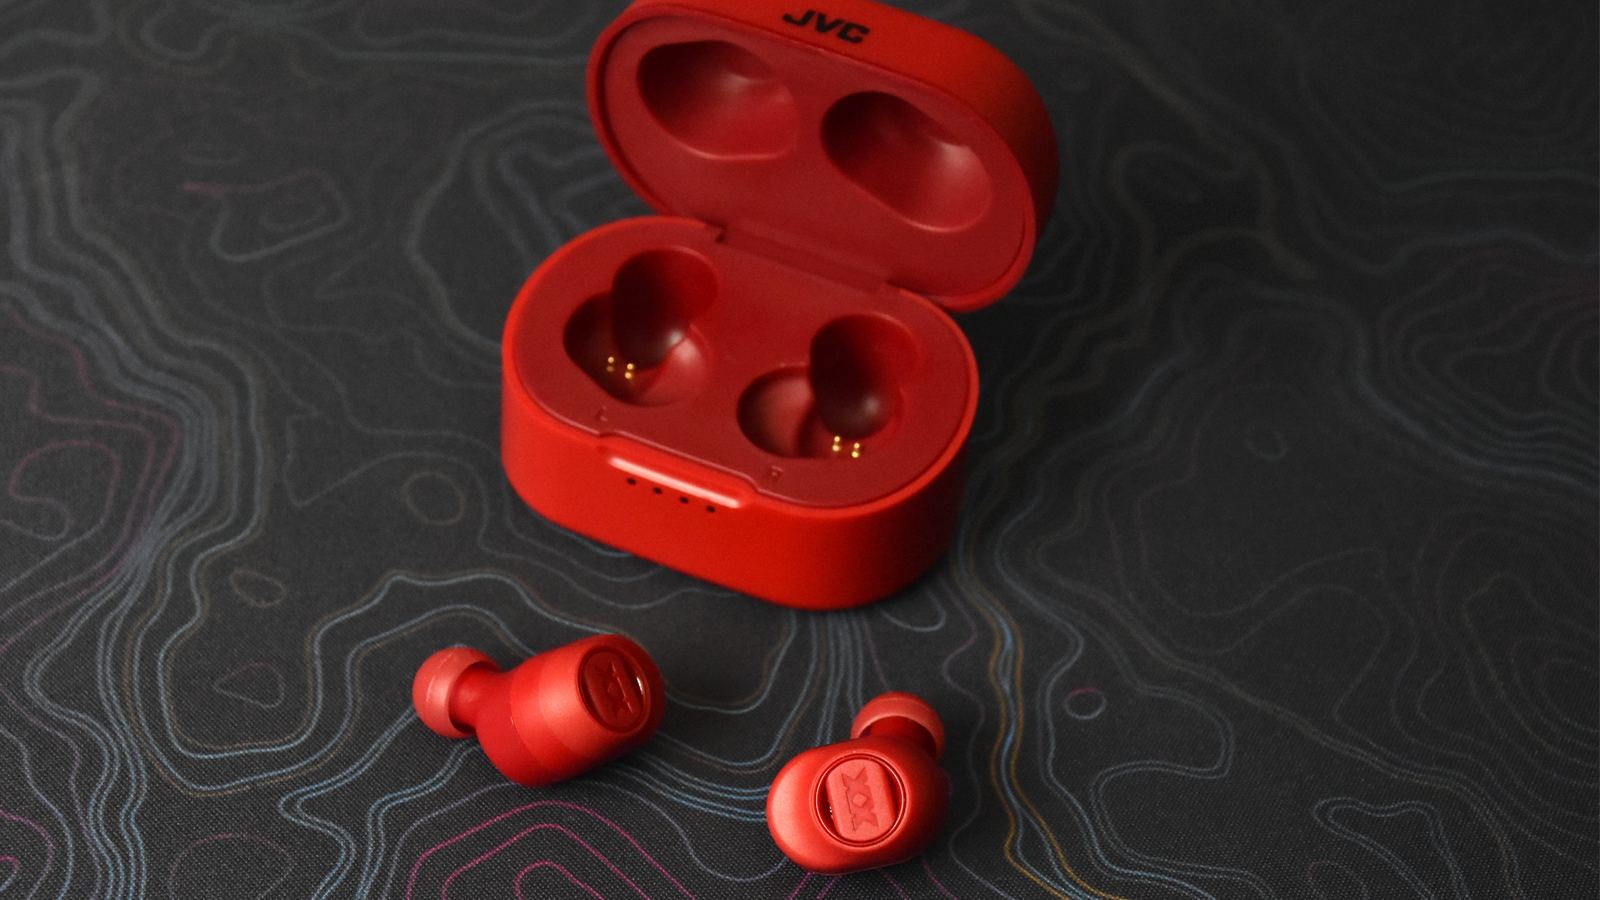 View of earbuds on table in front of open case